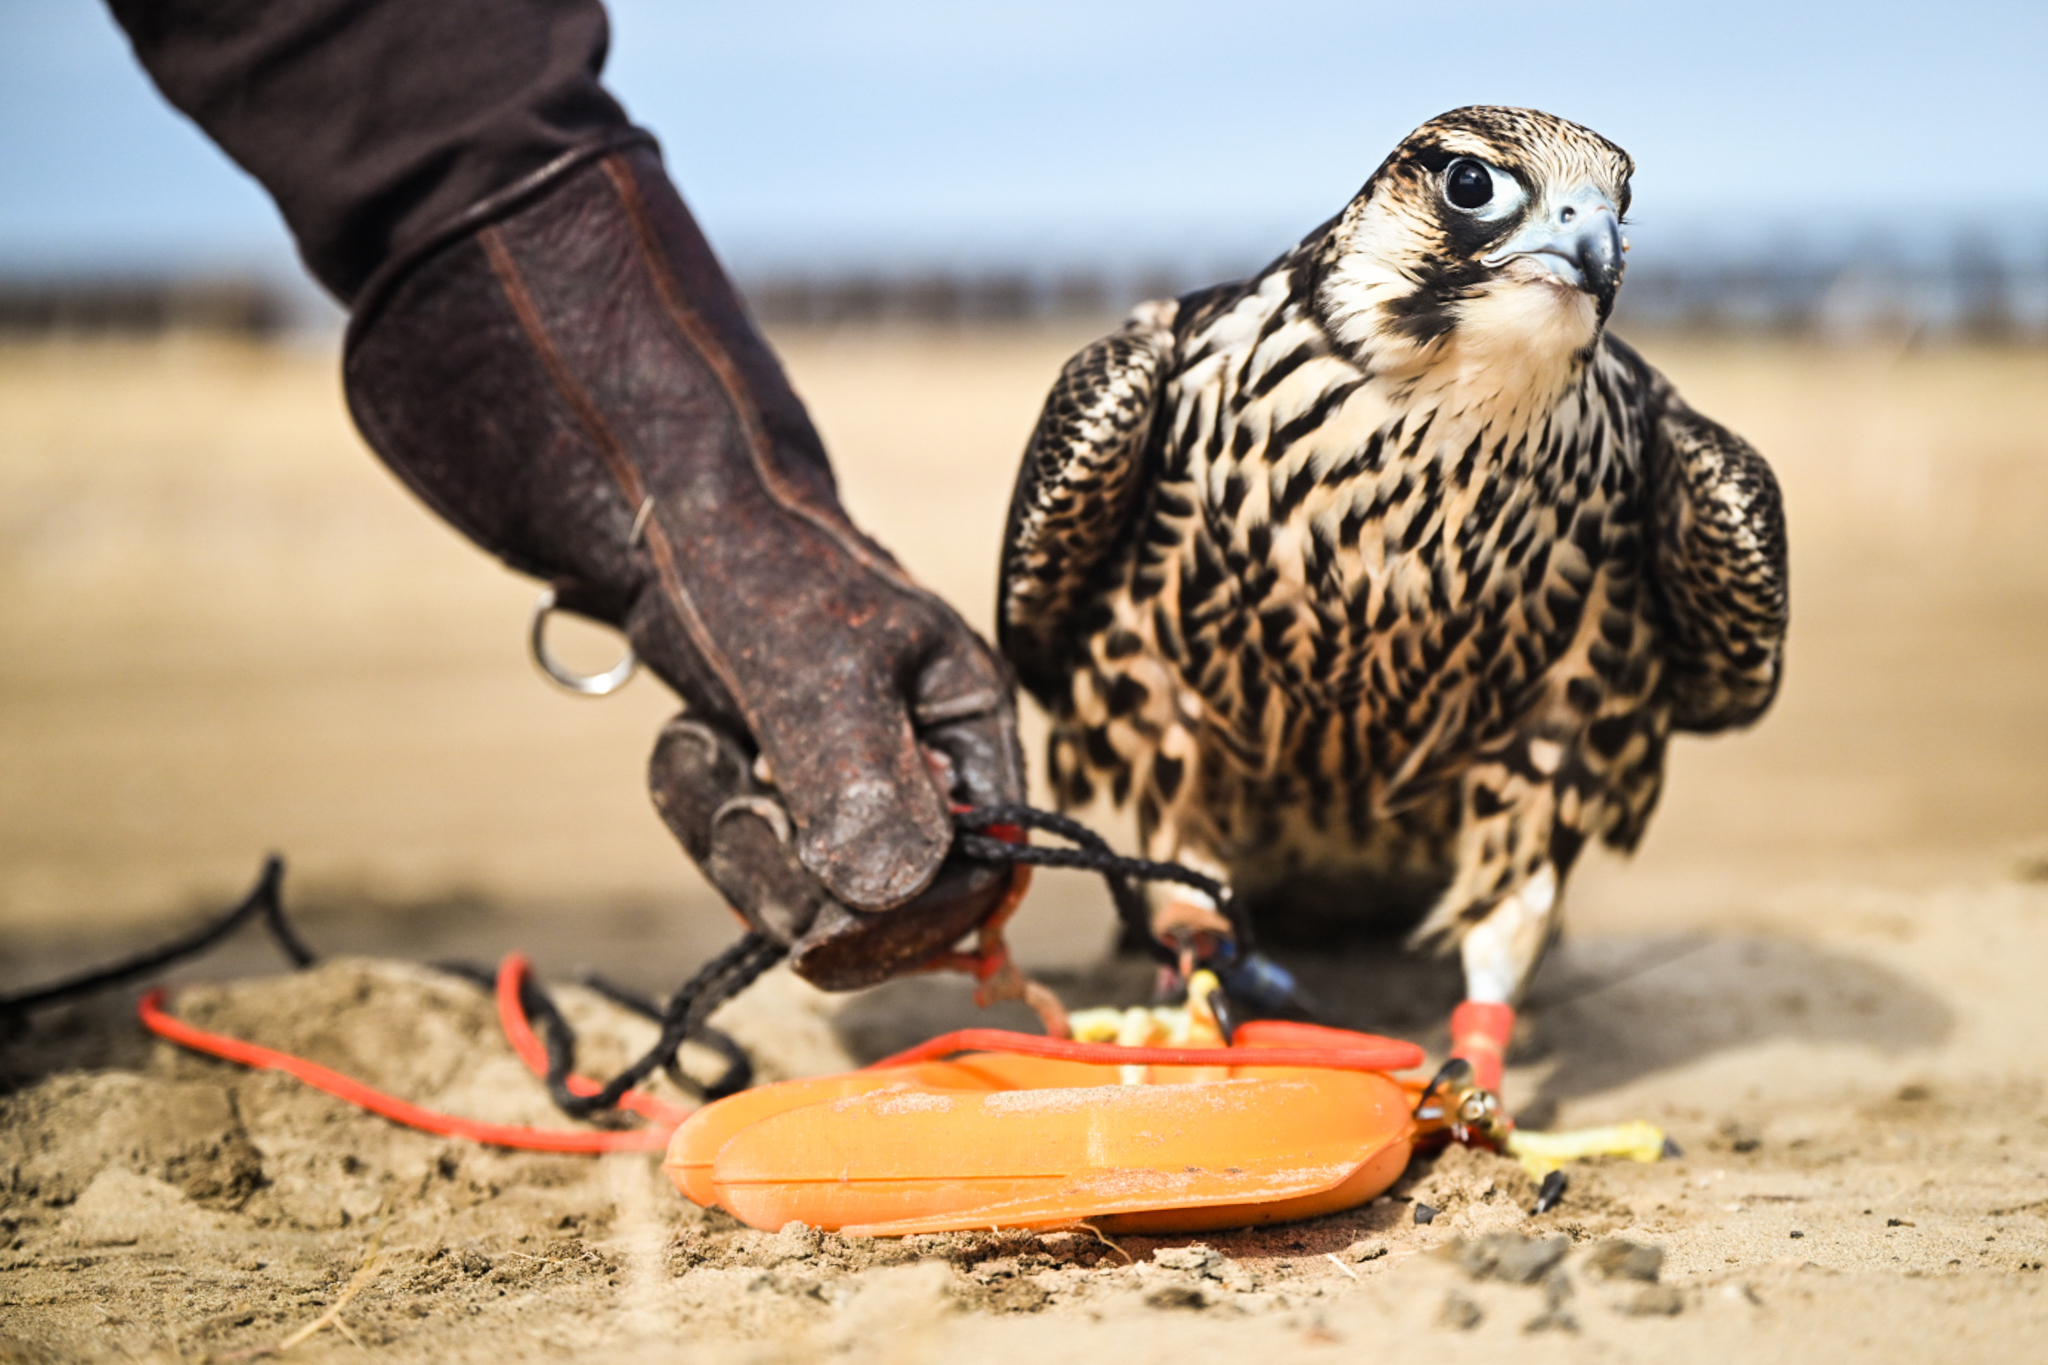 A falcon stand on a lure used for training recall after hunting flights